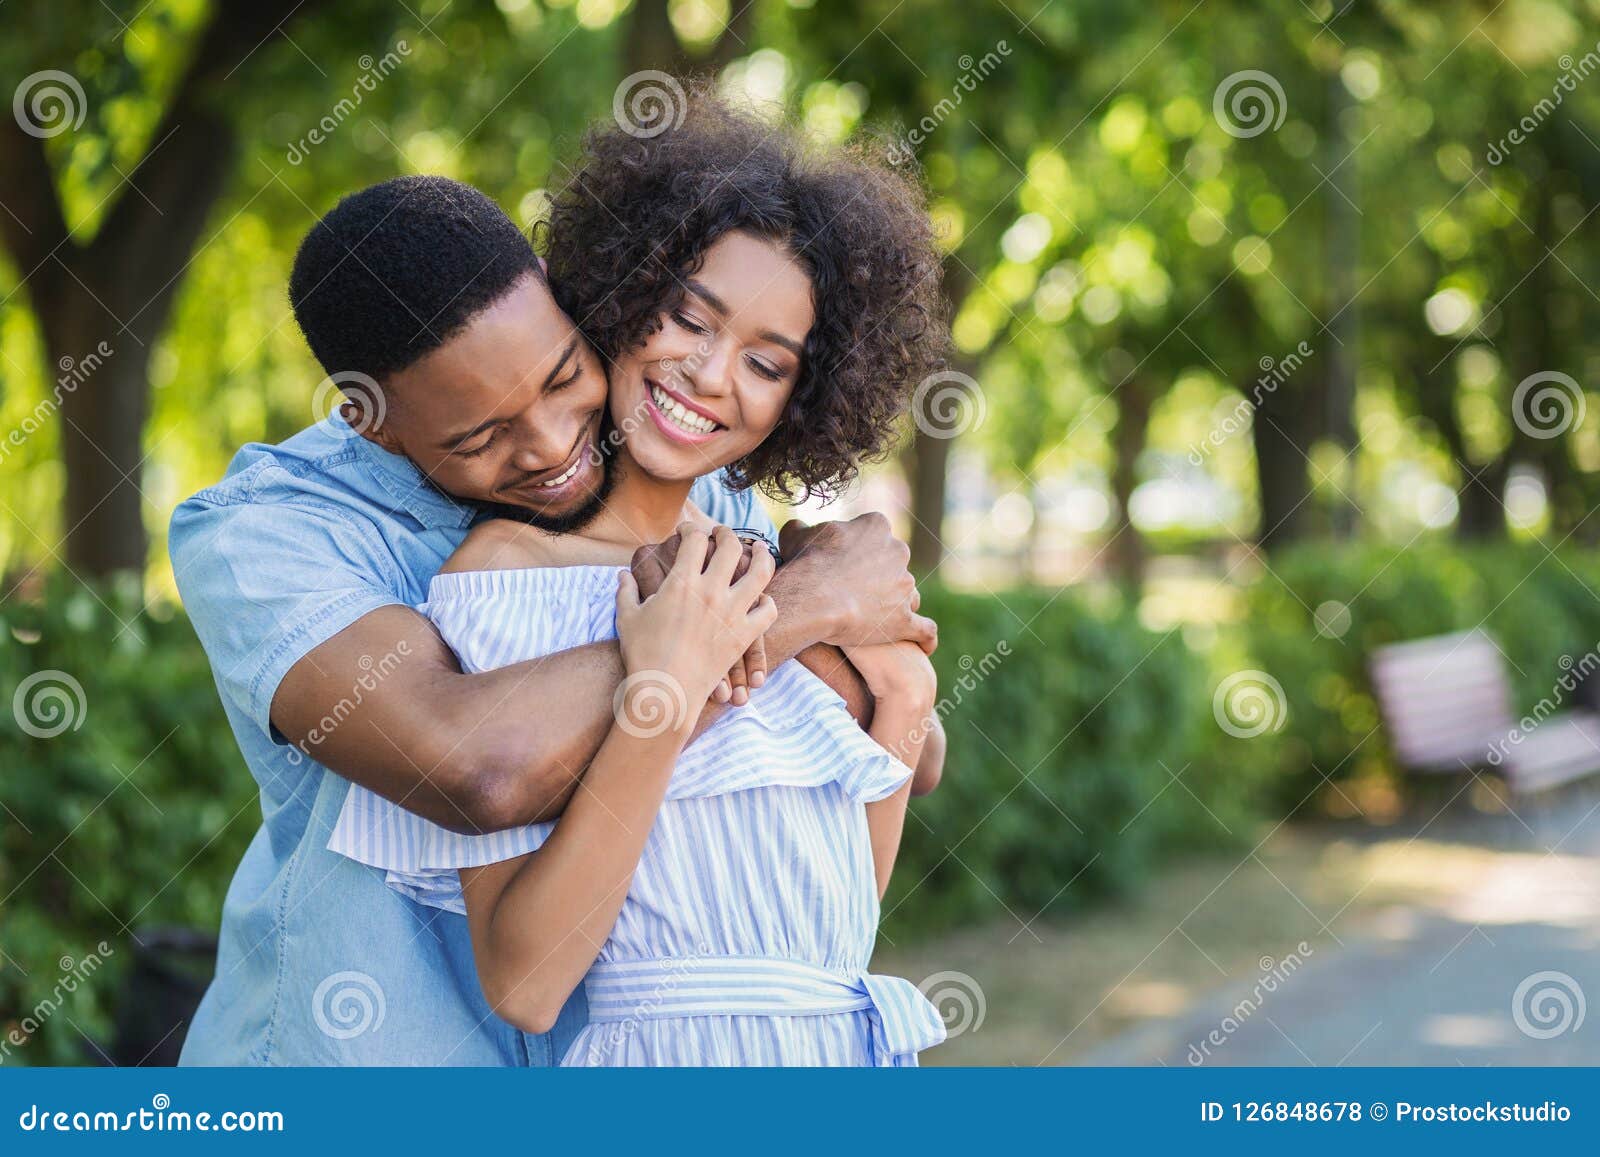 Happy Couple Embracing in Park on Sunny Day Stock Photo - Image of